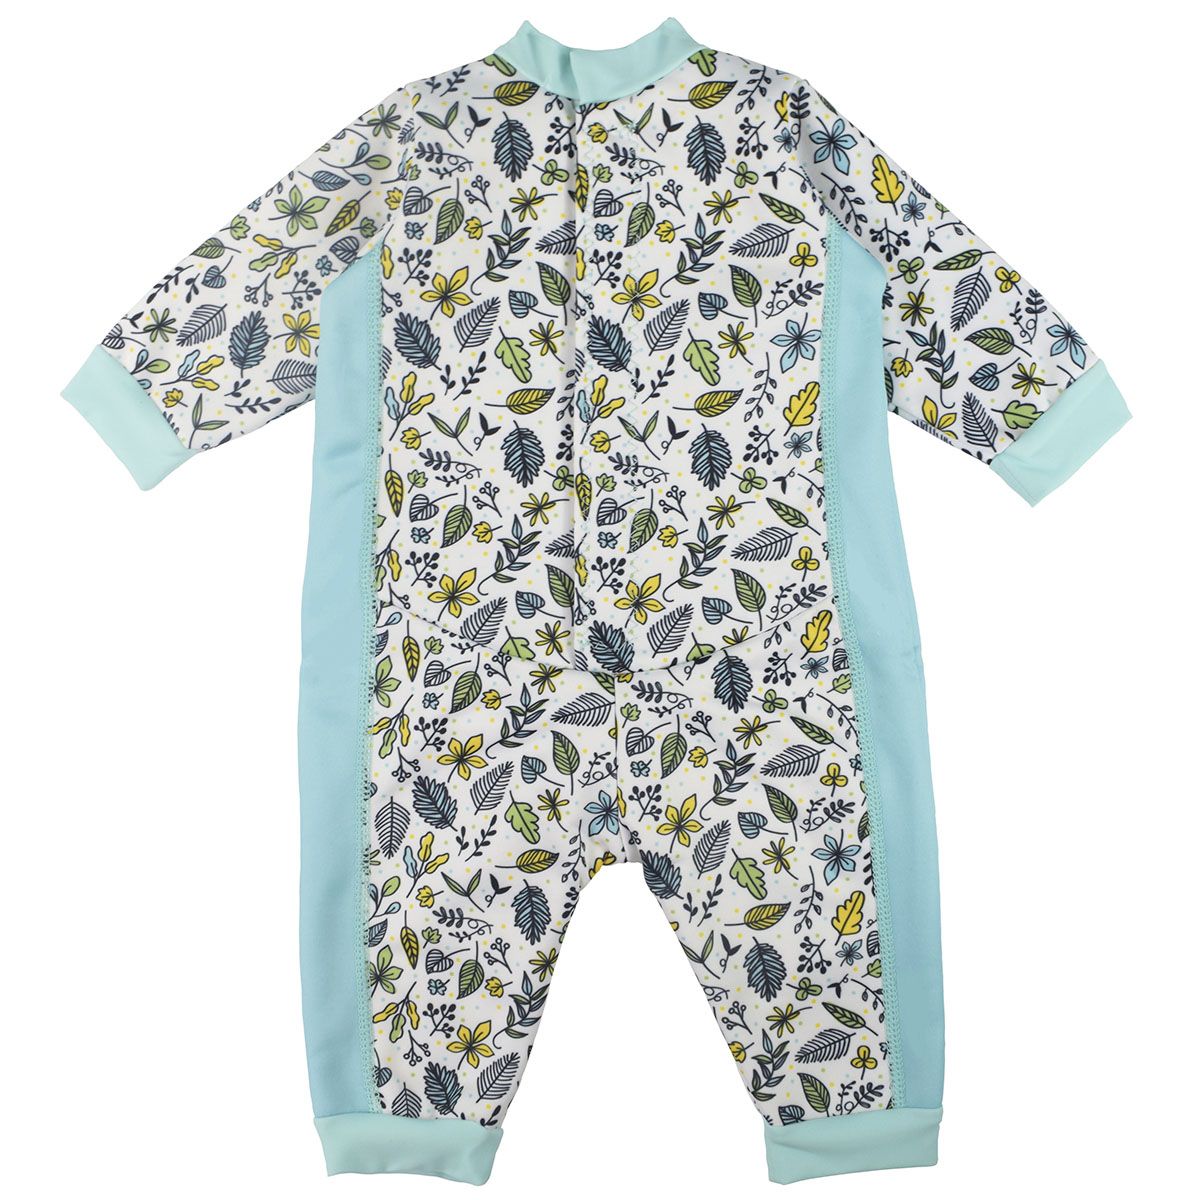 Fleece-lined baby wetsuit in white with light blue trims and leaves themed print. Back.